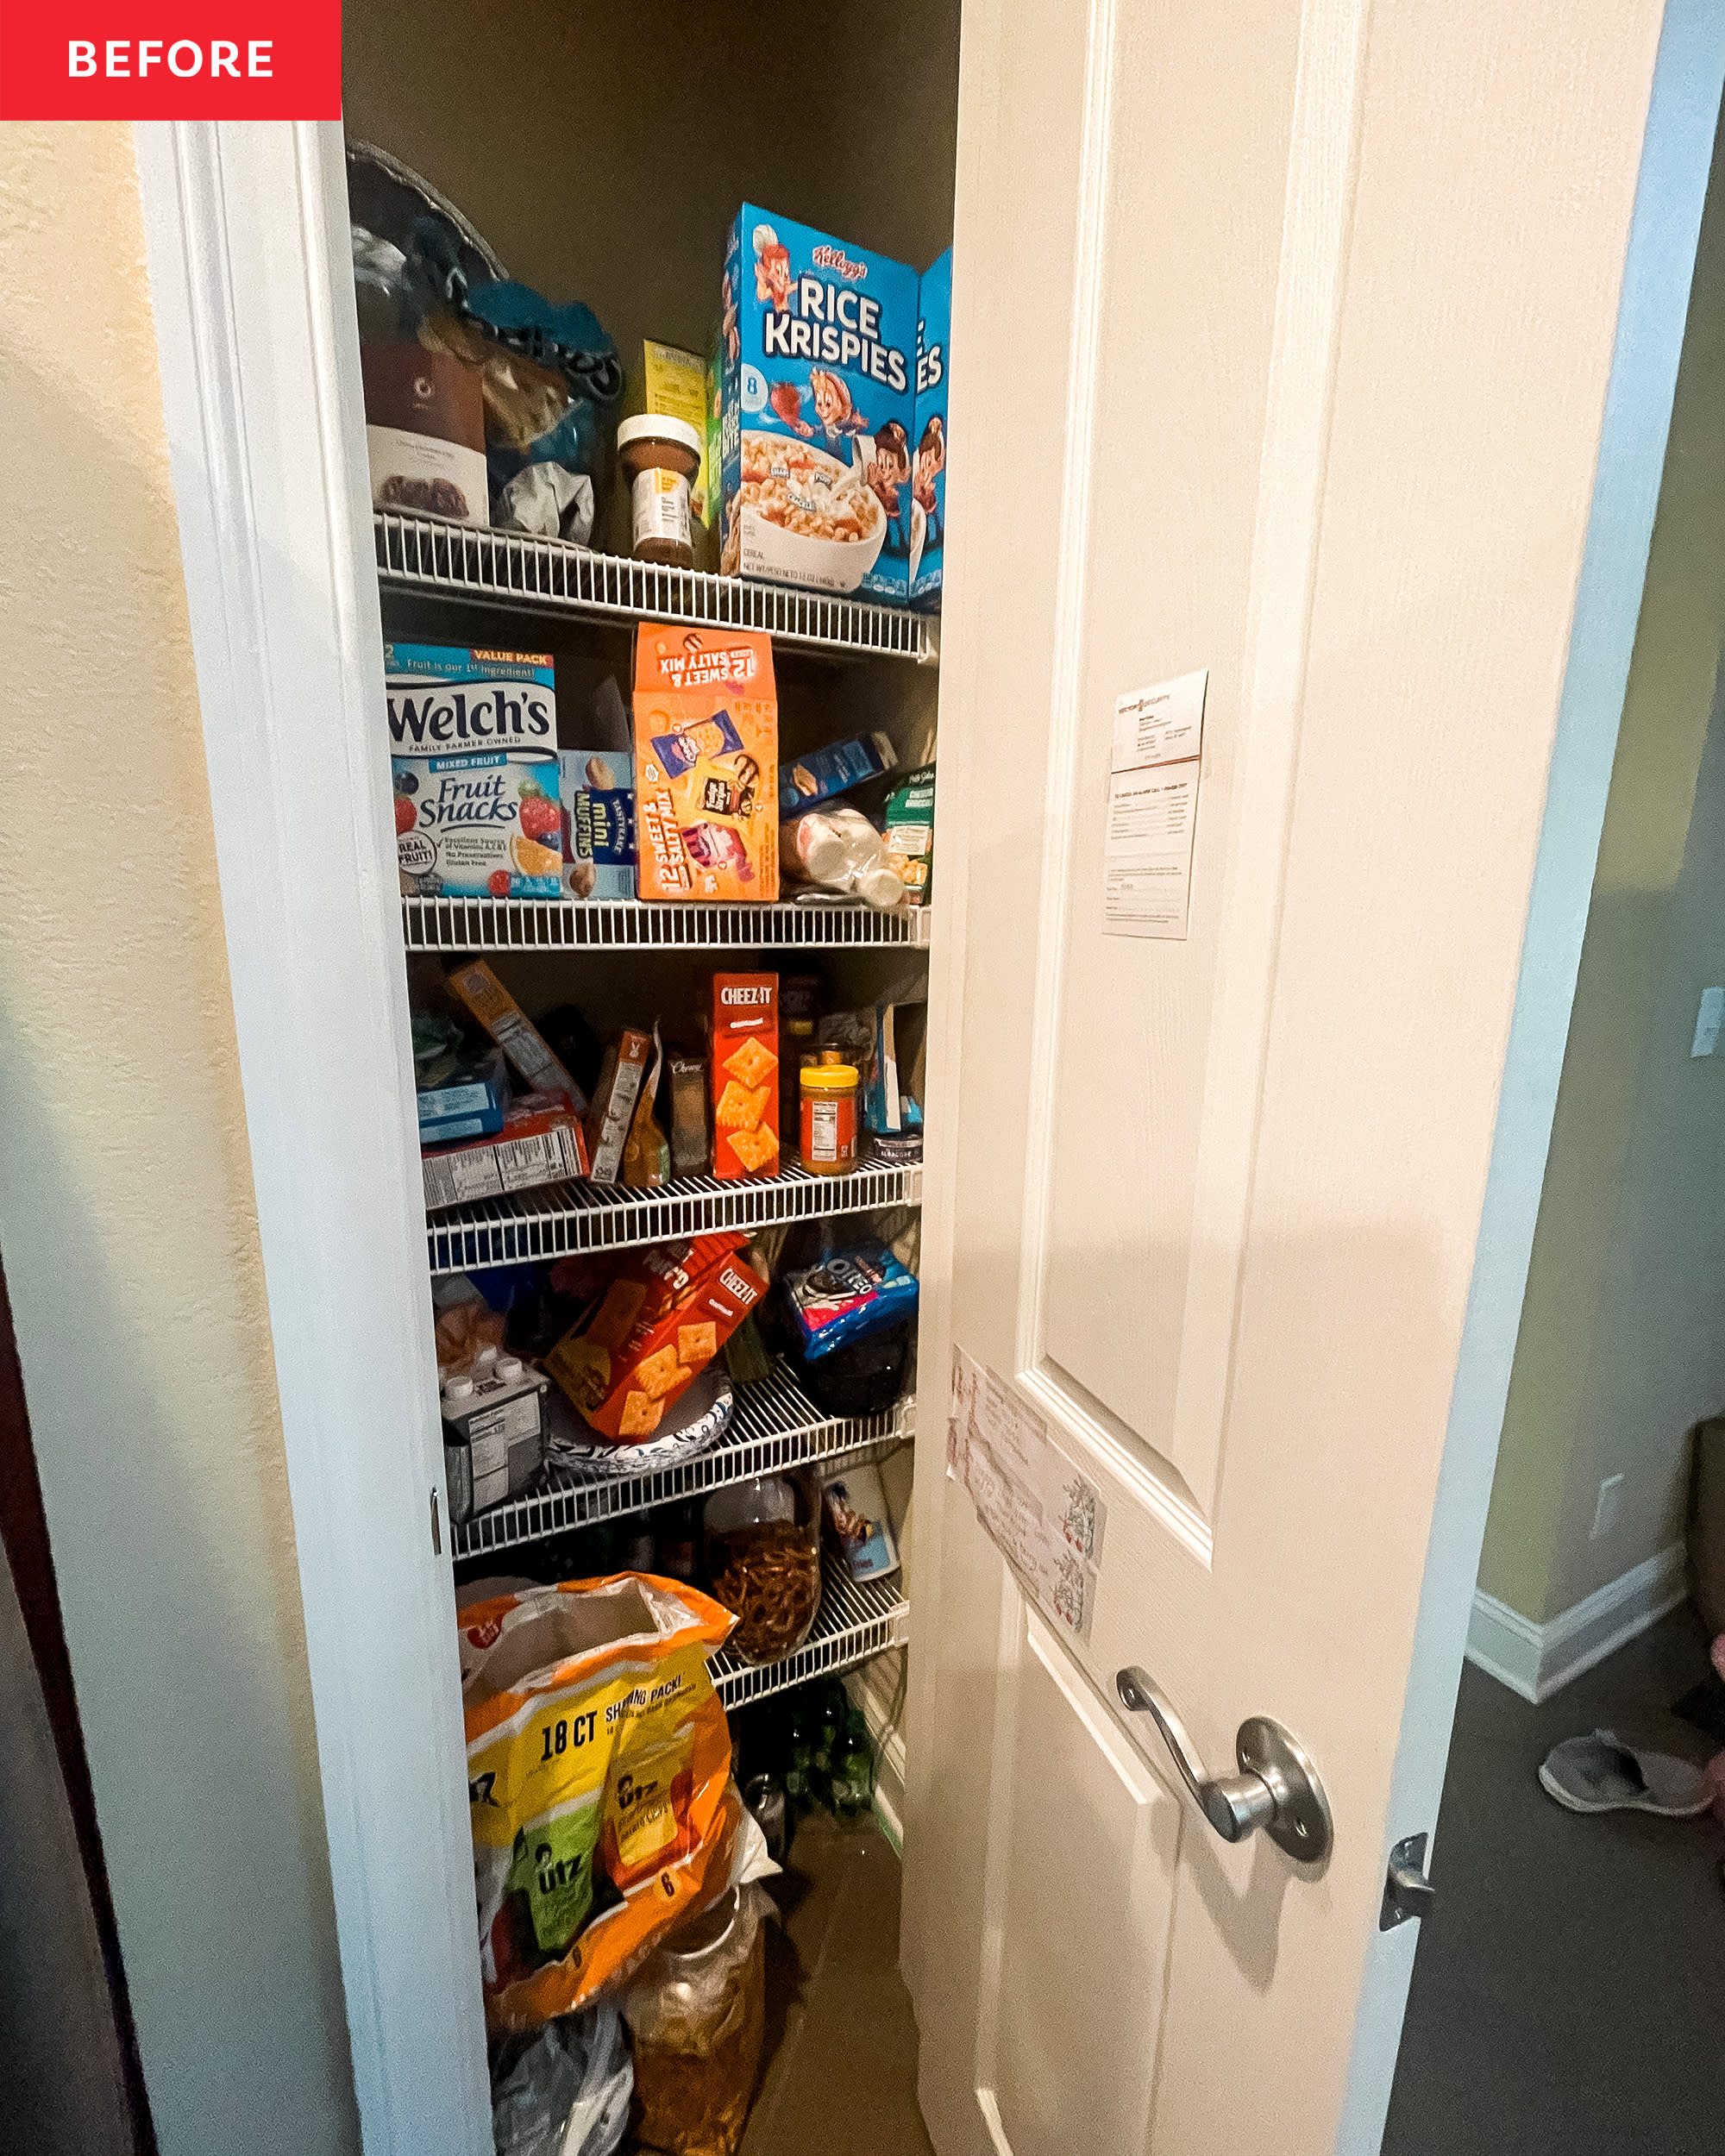 https://cdn.apartmenttherapy.info/image/upload/v1670980854/at/organize-clean/before-after/Kristol_Yeager_Client_Pantry%20/KristolYeager_111372791_IMG_4988.jpg